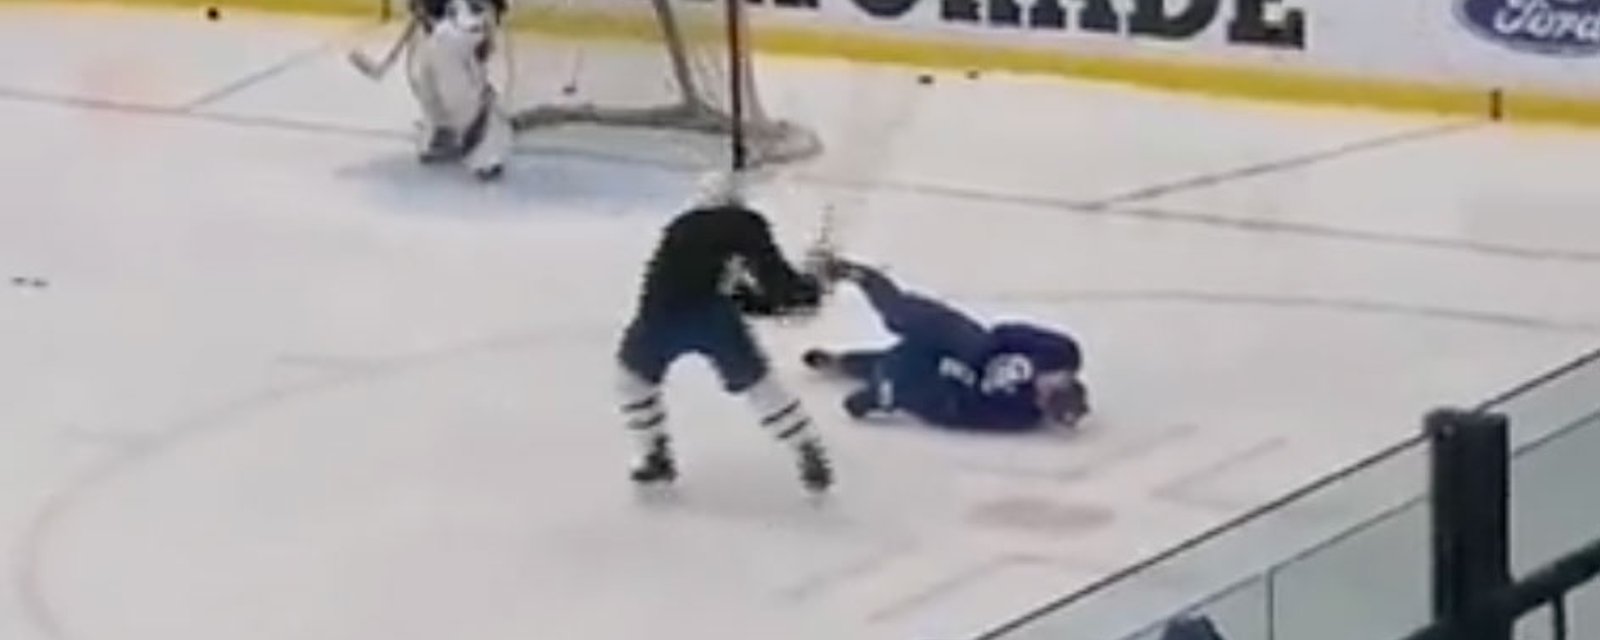 Maple Leafs assault their own mannequin during practice! 